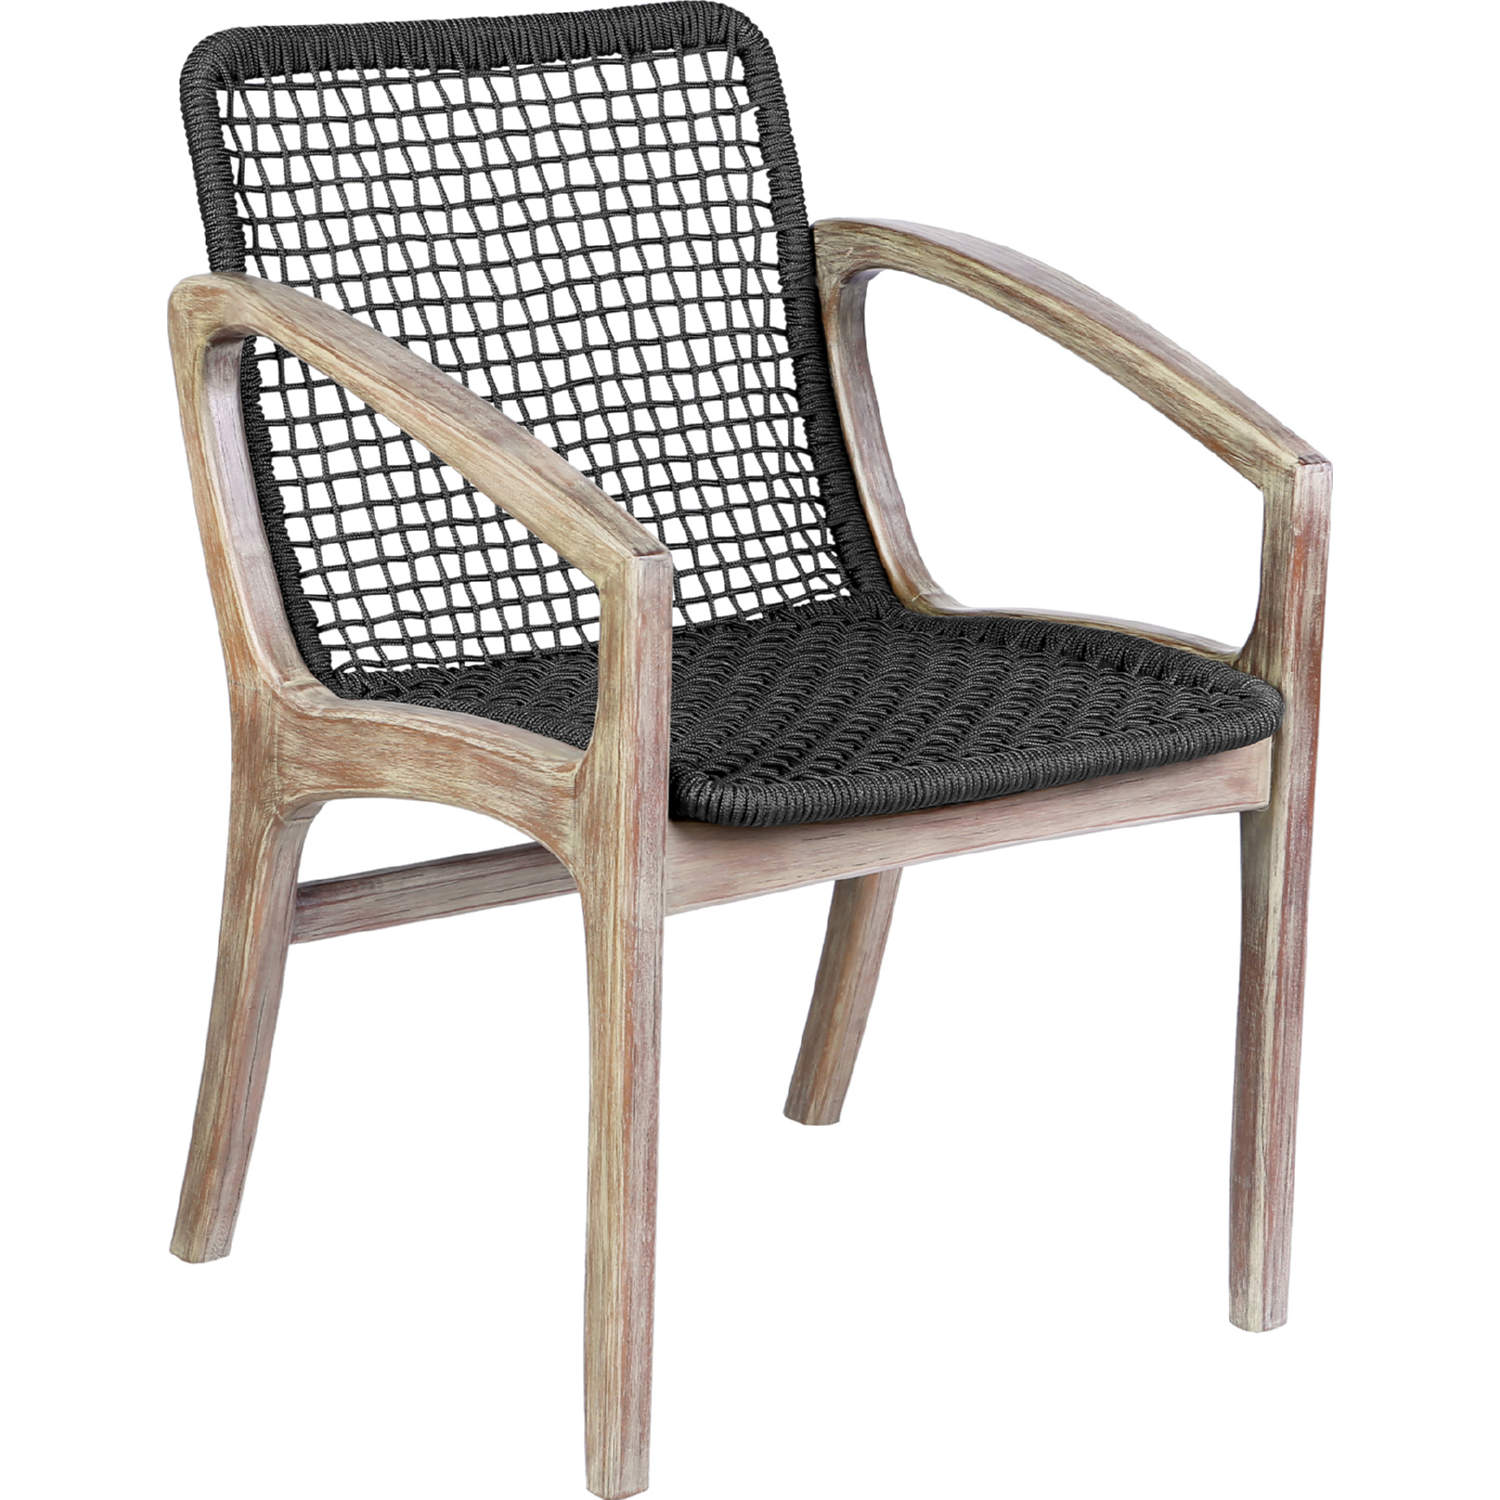 Armen Living Beckham Outdoor Patio Dining Chair in Light Eucalyptus Wood and Charcoal Rope LCBECHDKGRY